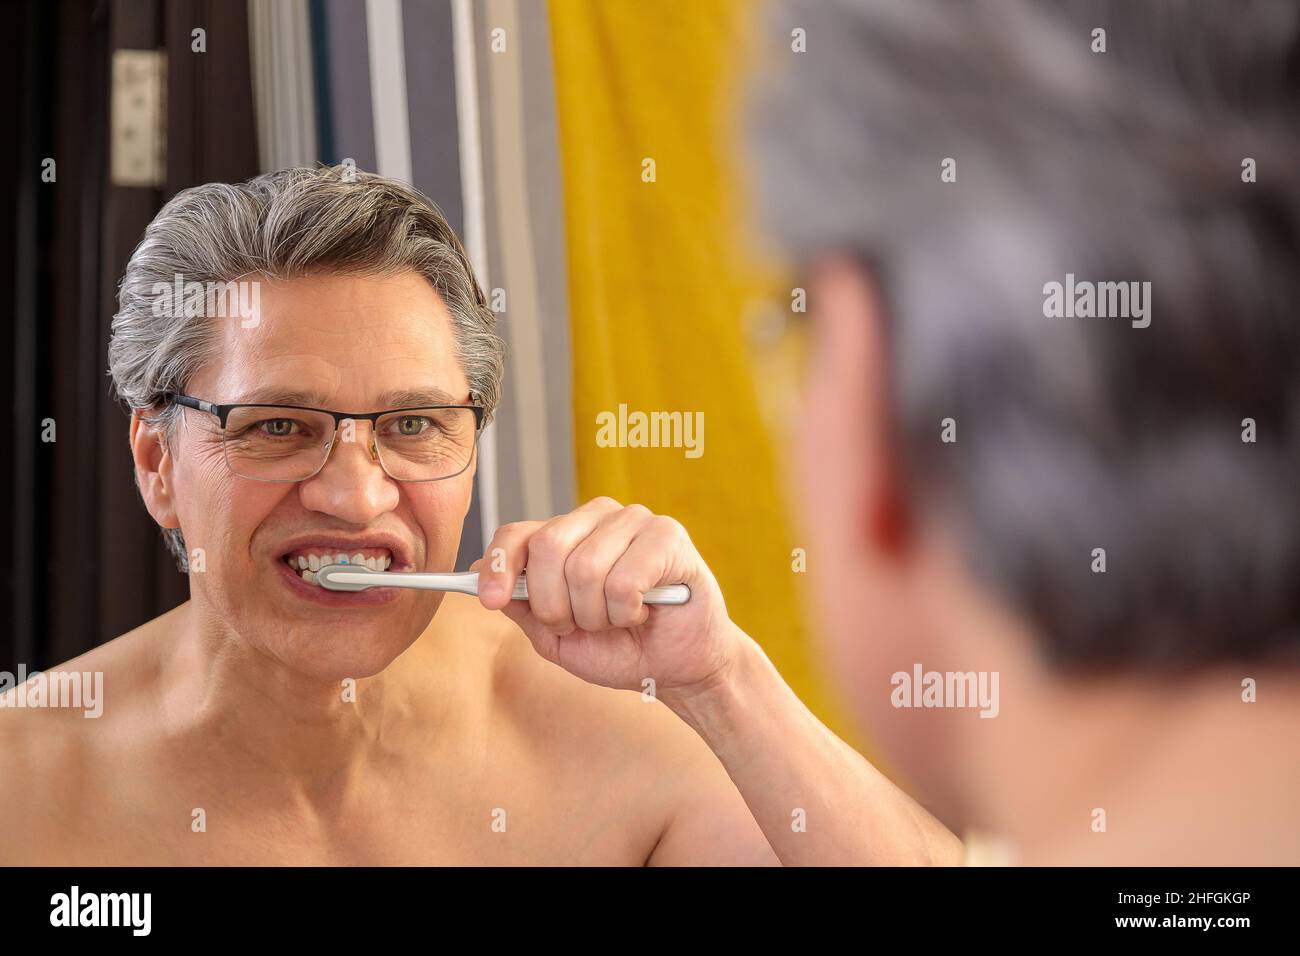 An adult gray-haired man brushes his teeth with a toothbrush and looks in the mirror. Stock Photo